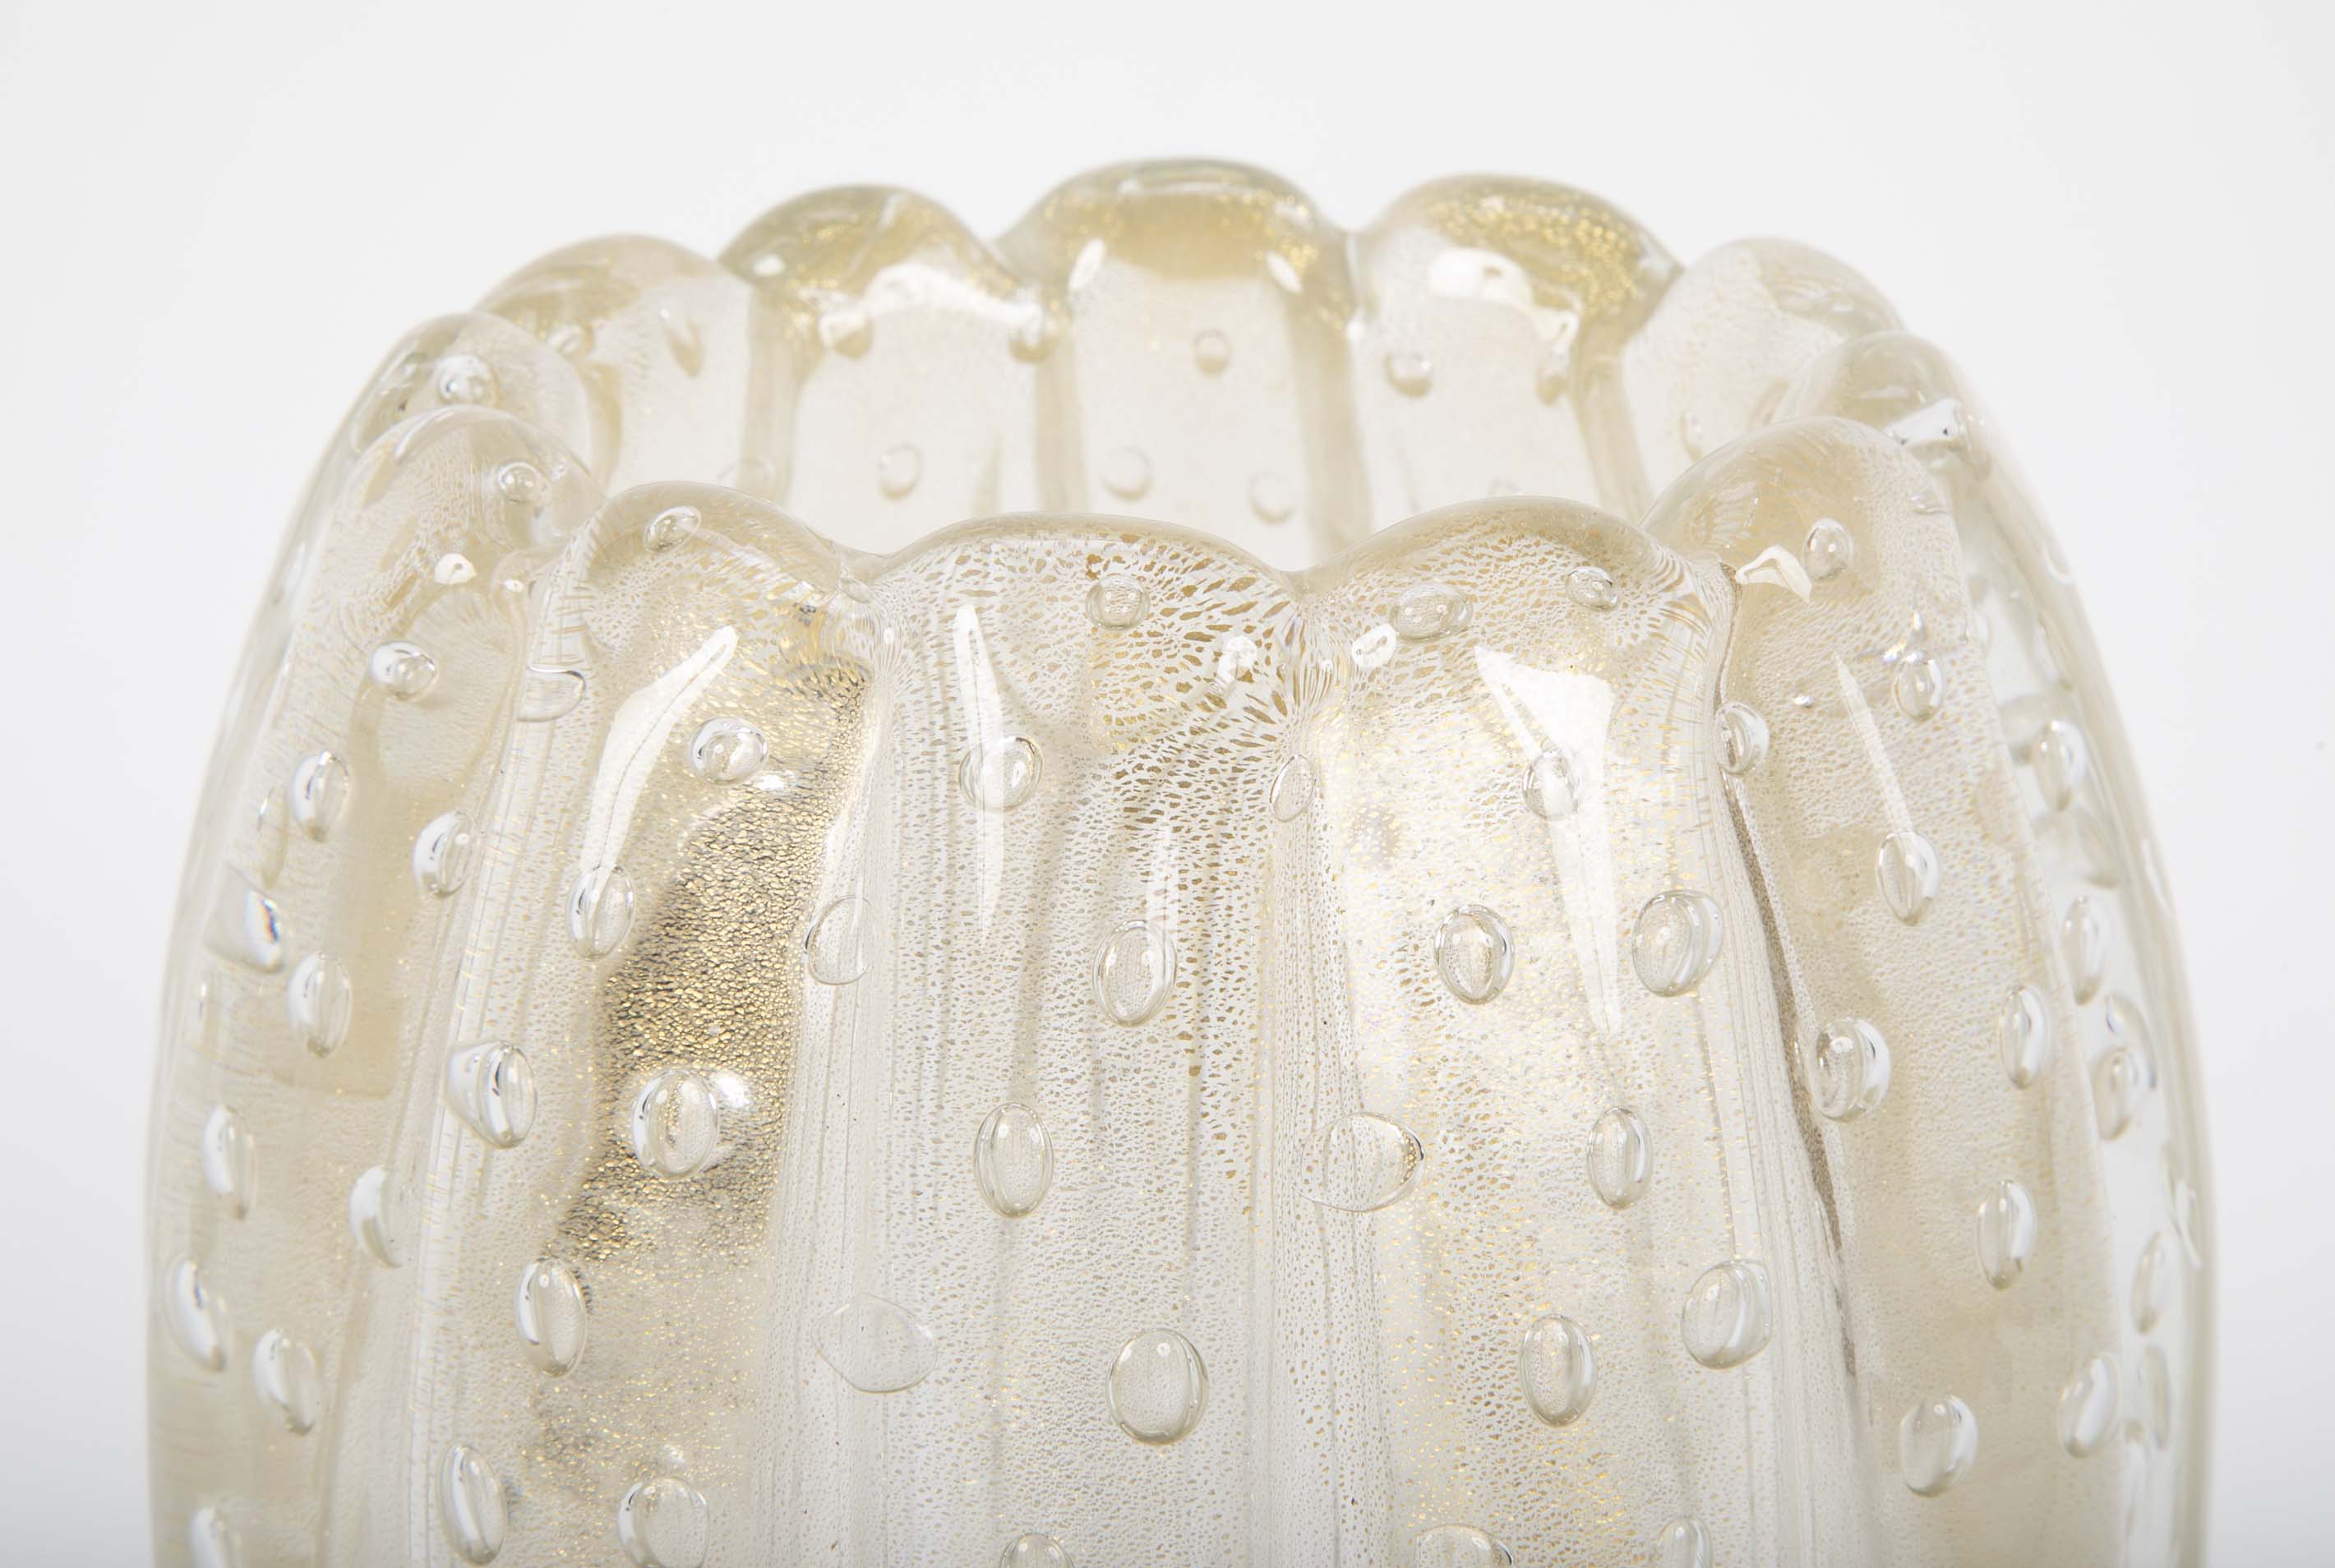 A Gold Flecked and Ribbed Clear Glass Vase by Ercole Barovier for Barovier & Toso